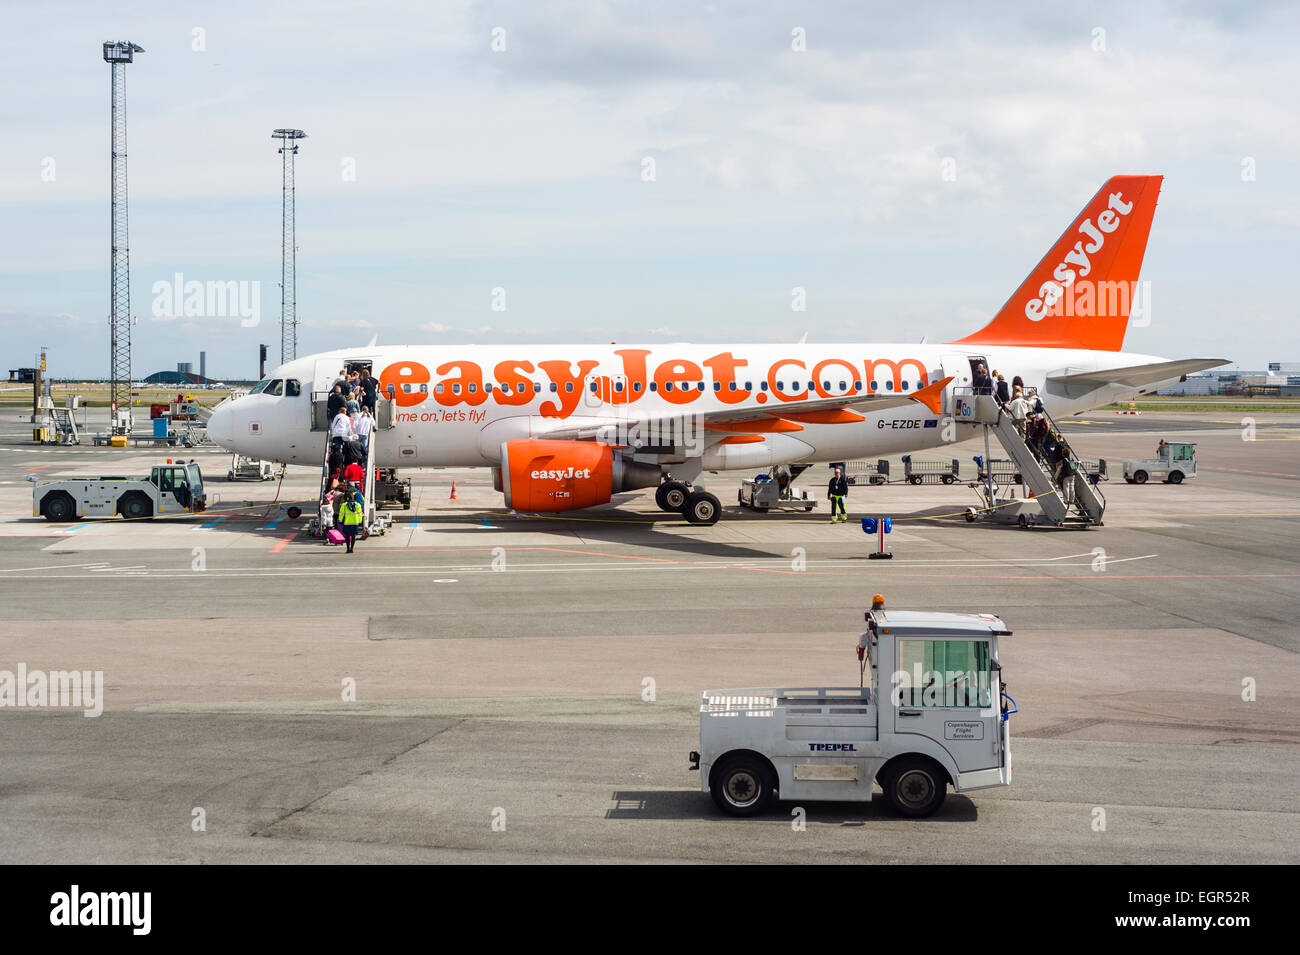 The last passengers bording an easyJet airliner at Copenhagen Airport, with ground staff preparing for takeoff. Stock Photo